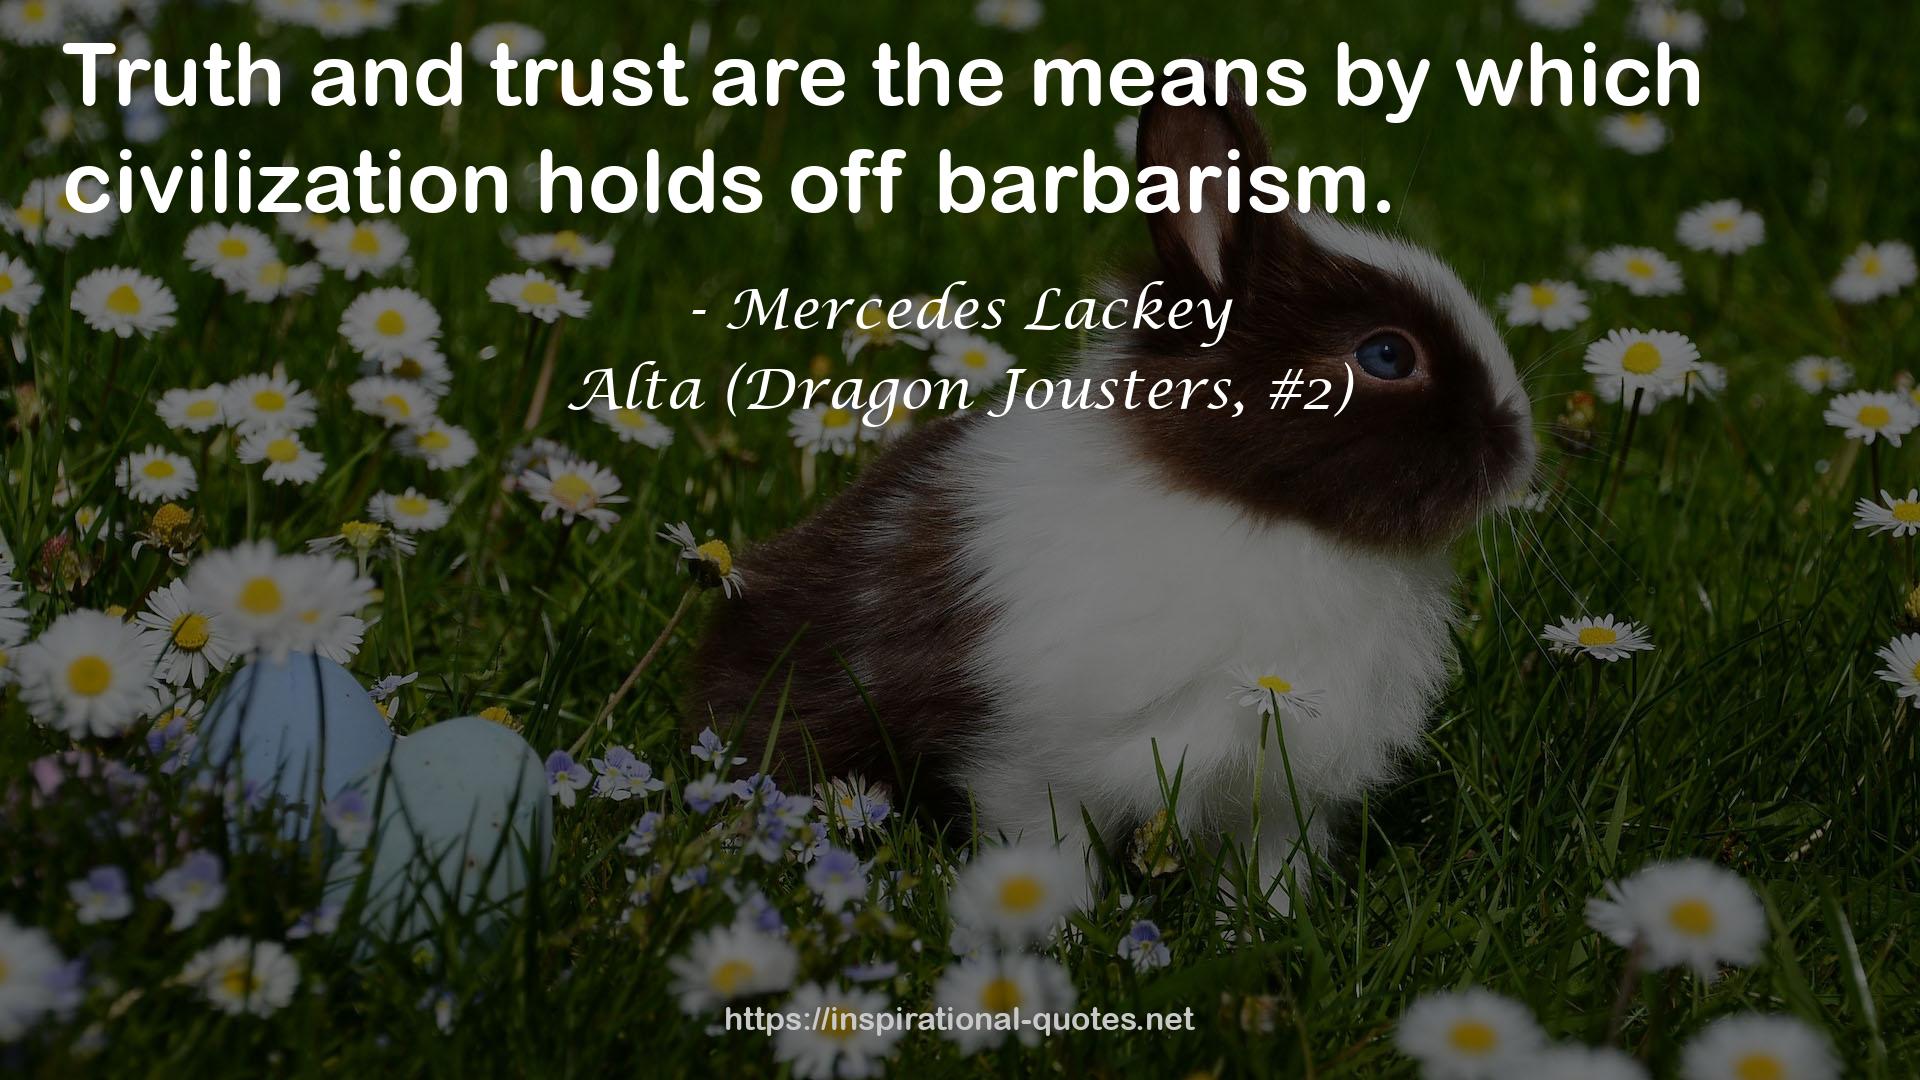 Alta (Dragon Jousters, #2) QUOTES